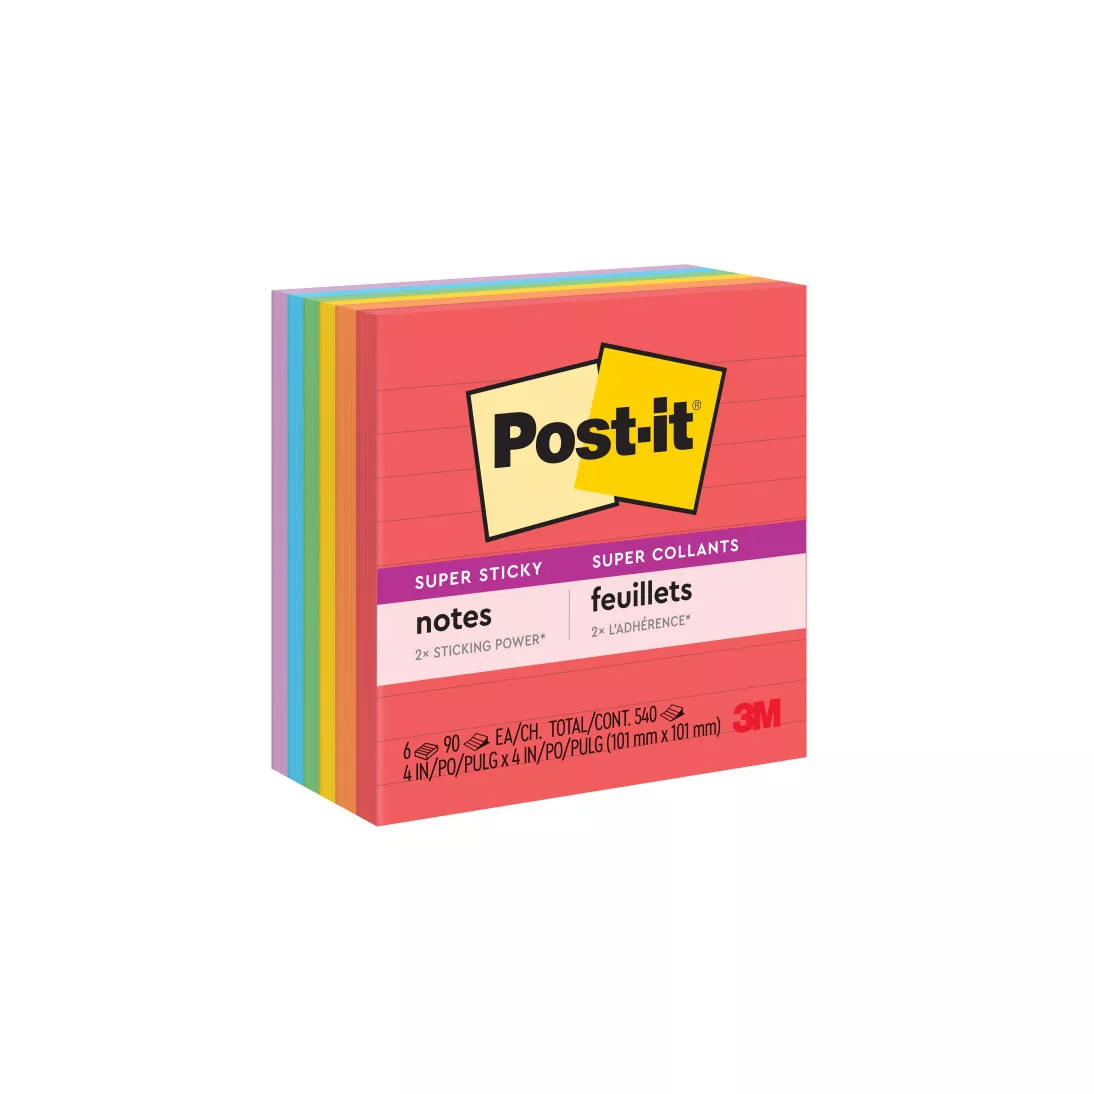 Post-it® Super Sticky Notes 675-6SSAN, 4 in x 4 in (101 mm x 101 mm)
Marrakesh Collection, Lined, 6 Pads/Pack